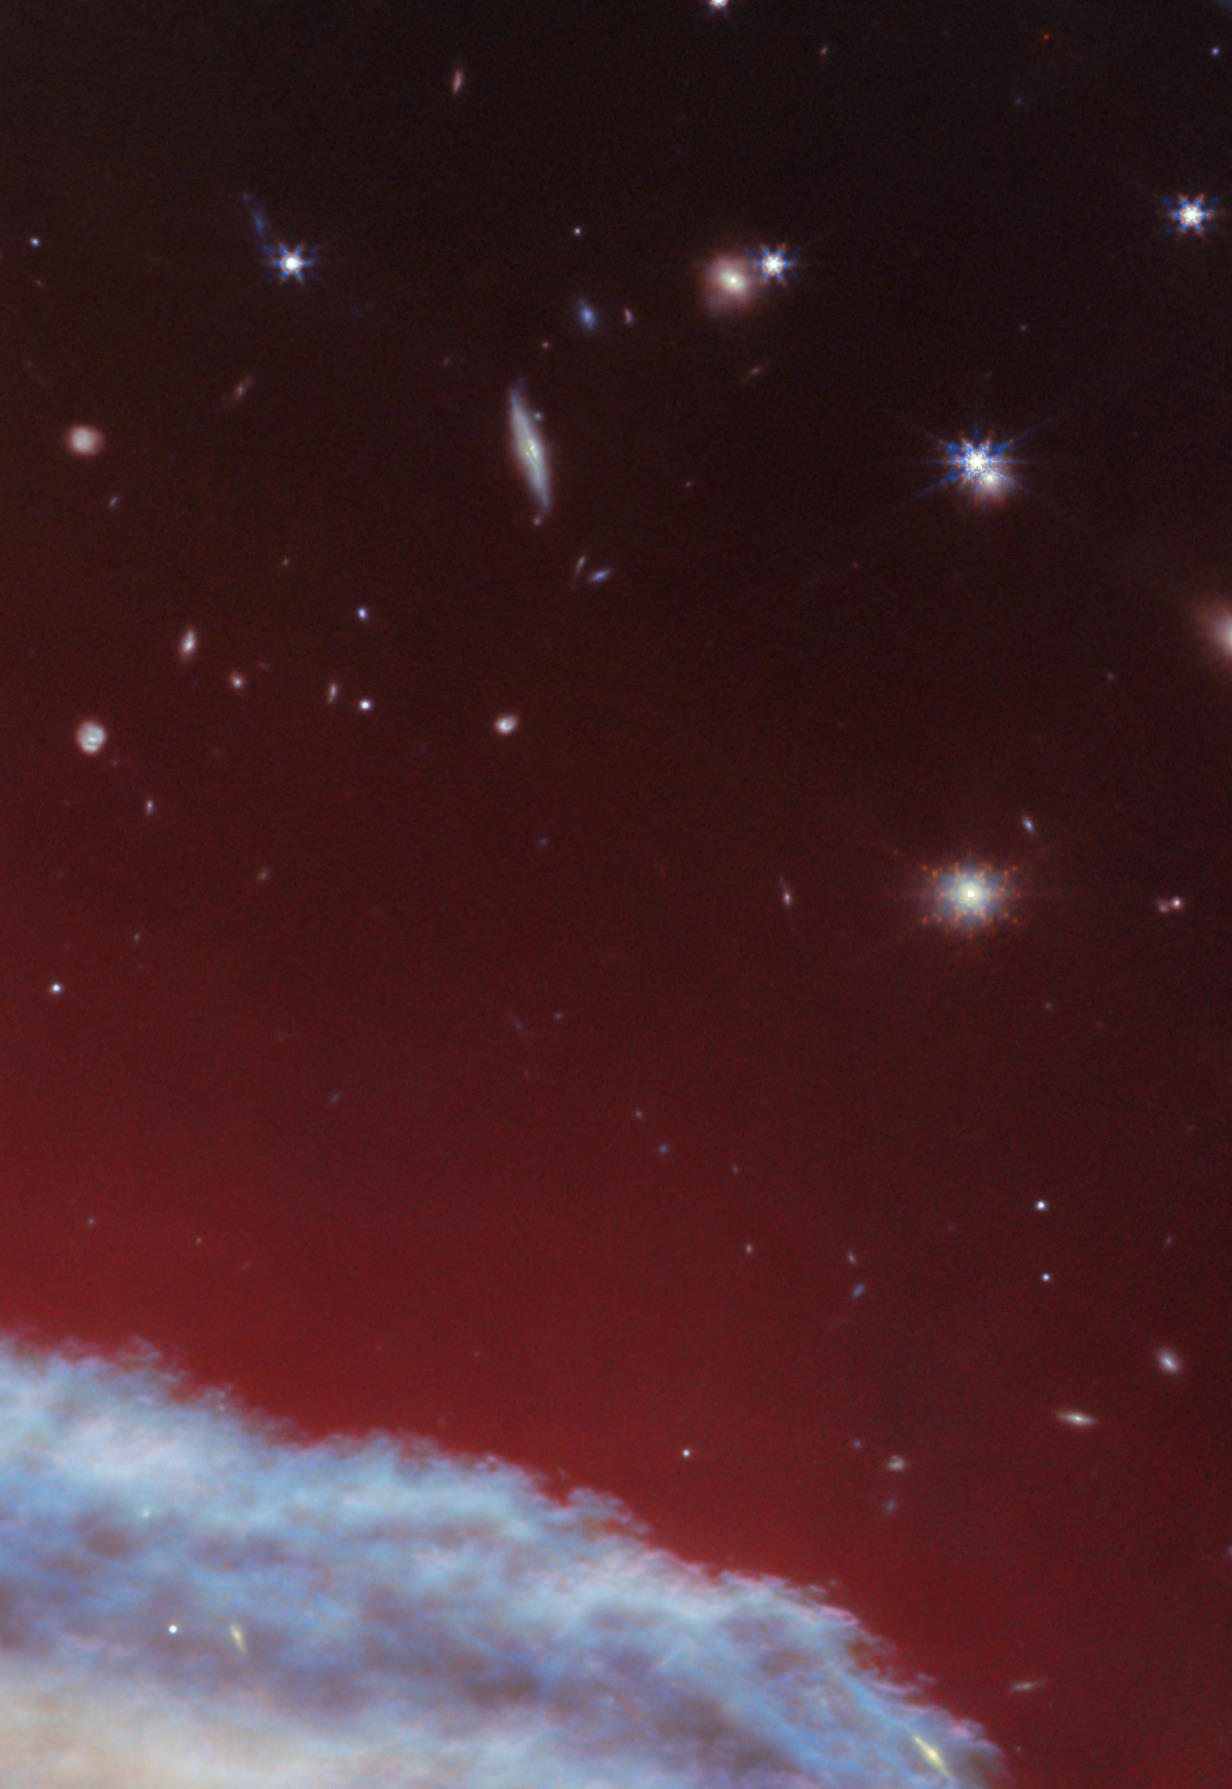 A vibrant image captured by the JWST of space featuring a blue nebulous cloud at the bottom with a scattering of stars and distant galaxies against a deep red backdrop.